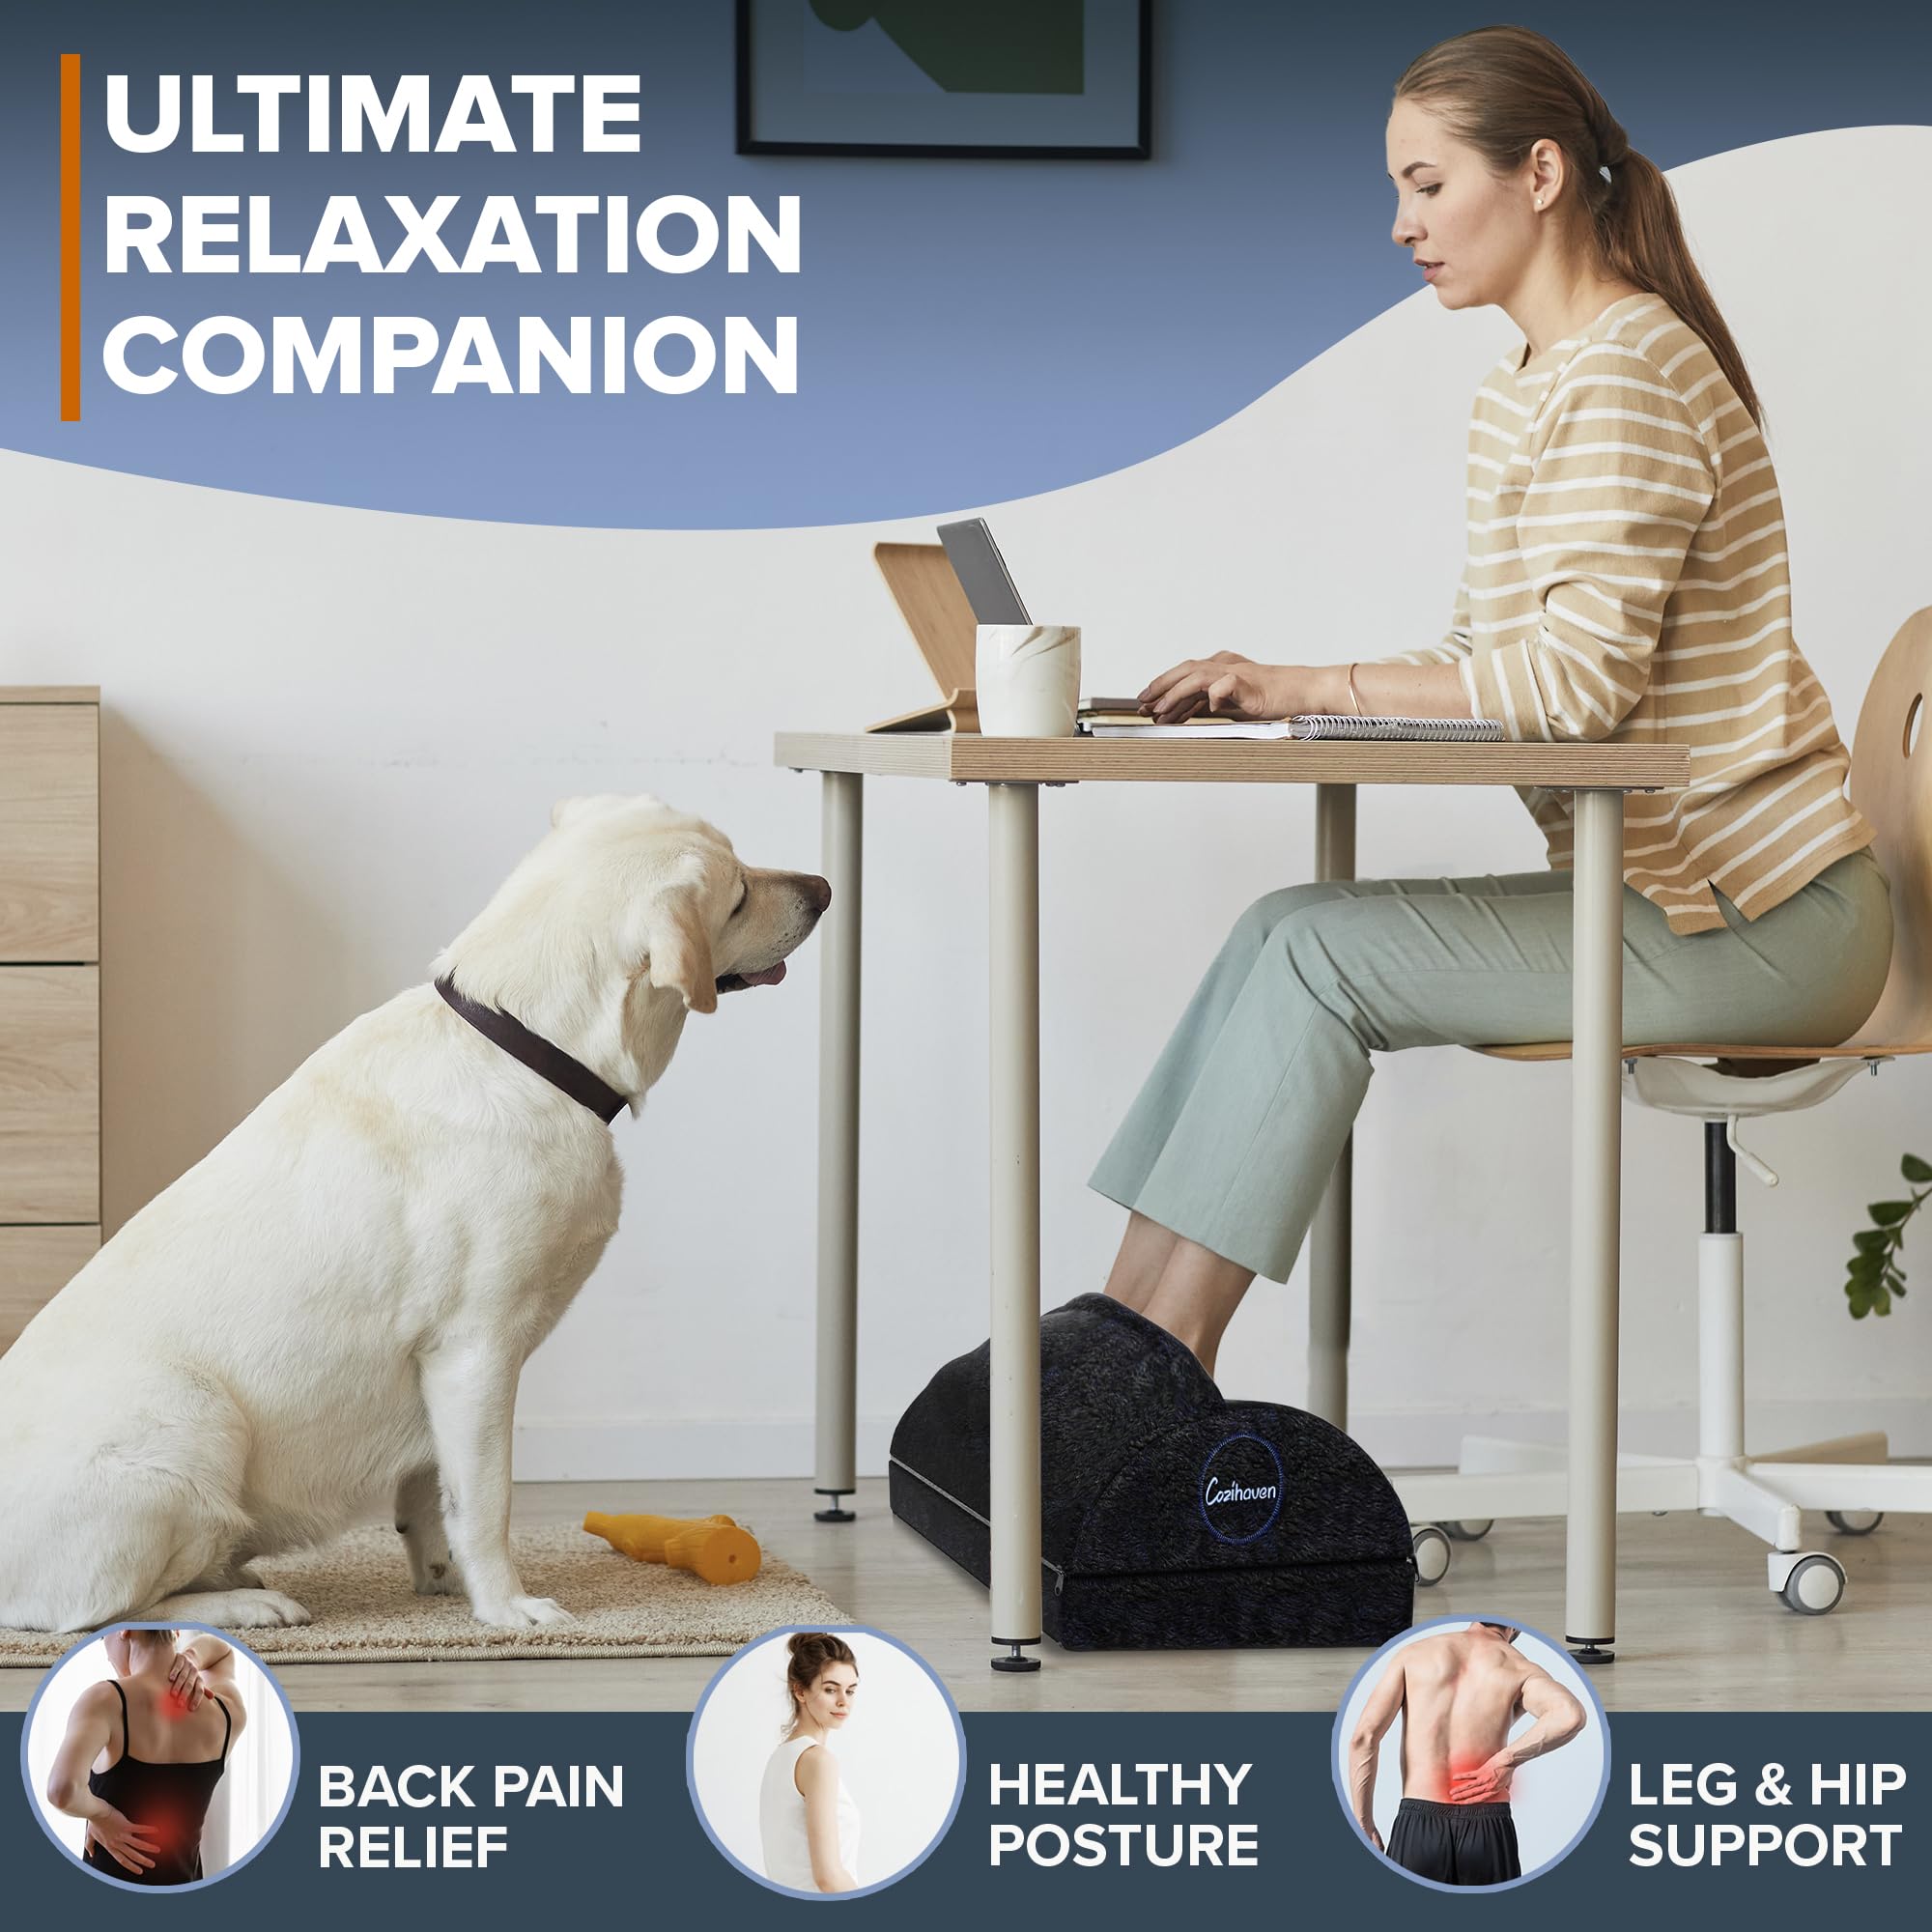 Cozihaven Foot Rest for Under Desk at Work with Premium Warmer Feet Pocket - Ergonomic Foot Rest for Back Pain Relief - 3 Adjustable Heights Memory Foam Tall Footrest for Gaming Computer Chair